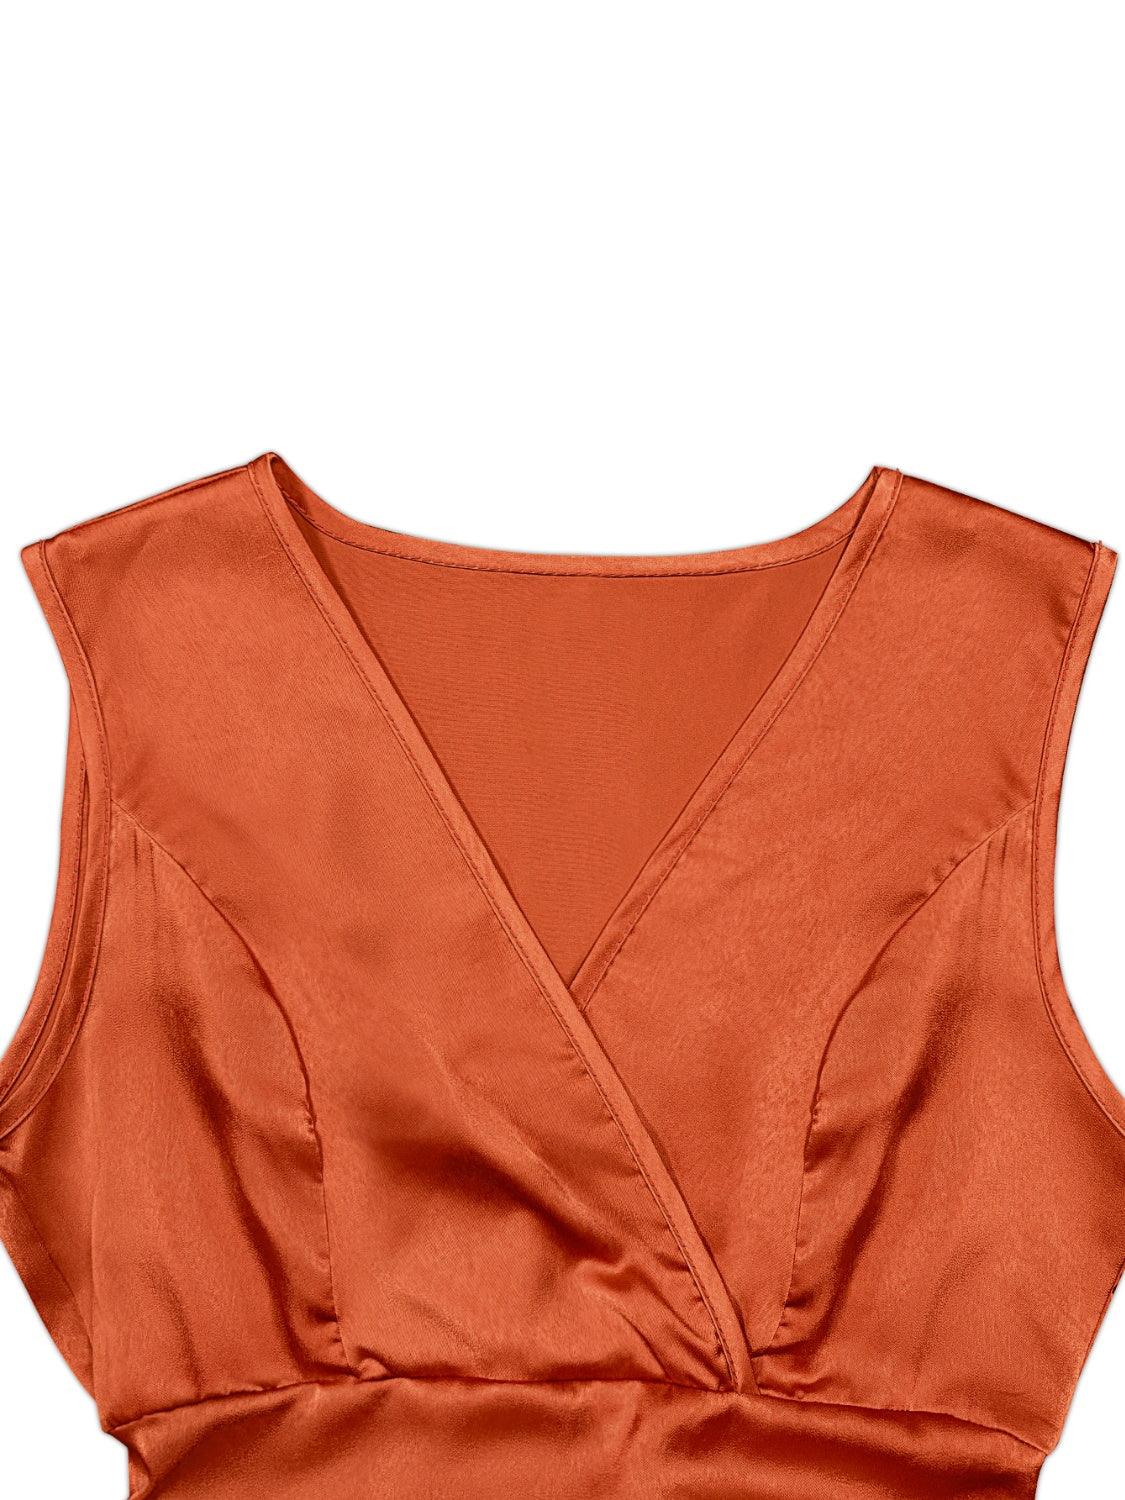 an orange top with a knot on the front